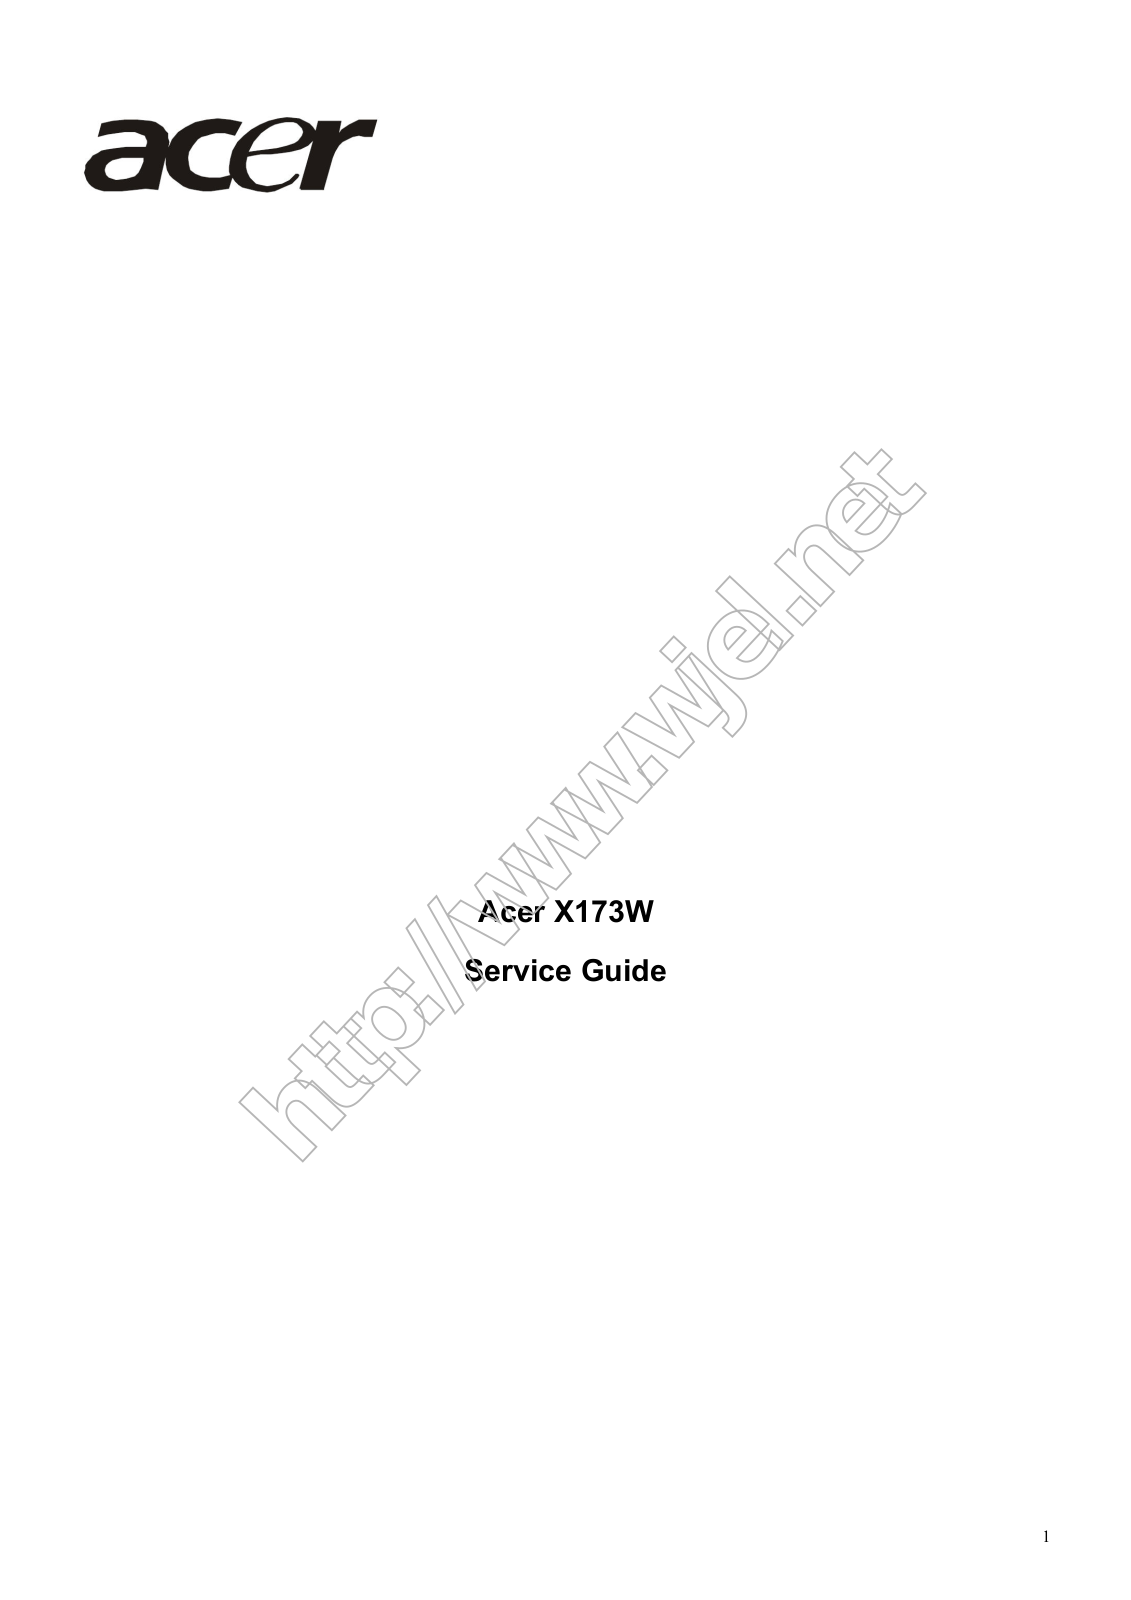 Acer X173W Service Guide